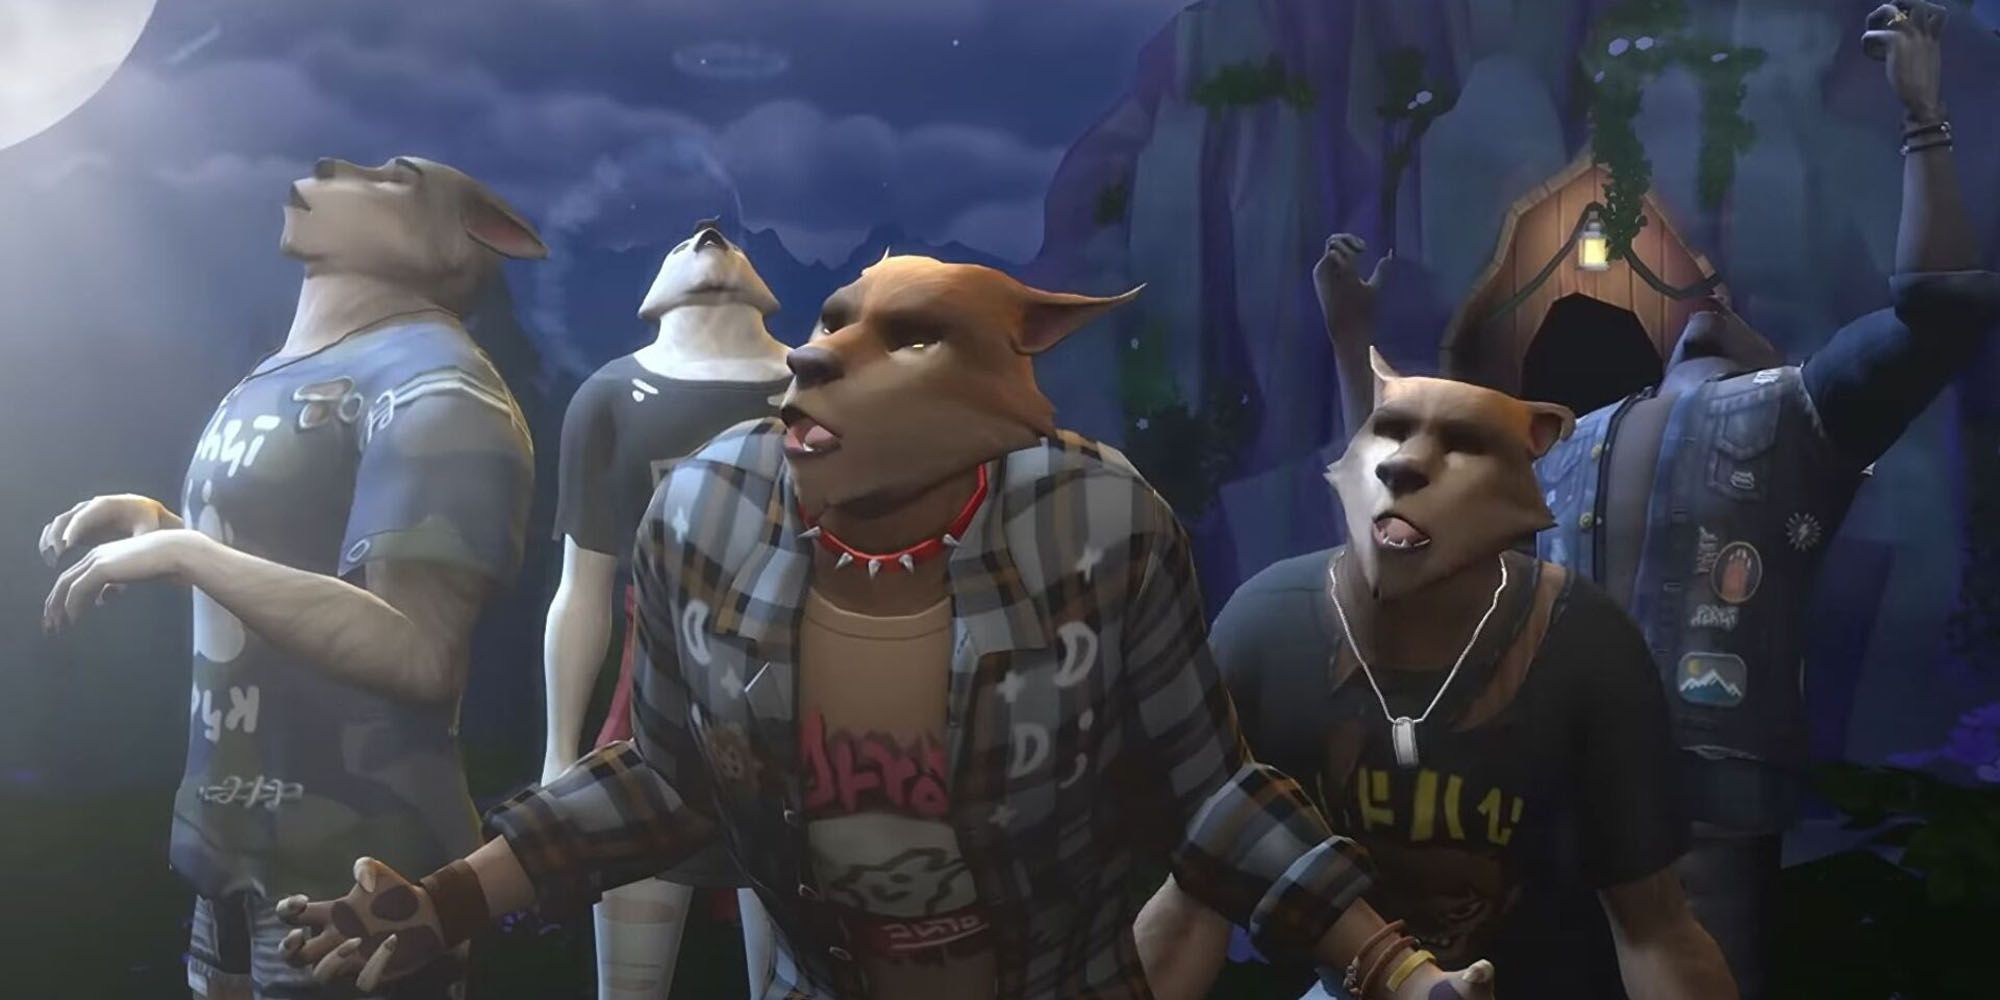 The Sims 4 Werewolf Pack